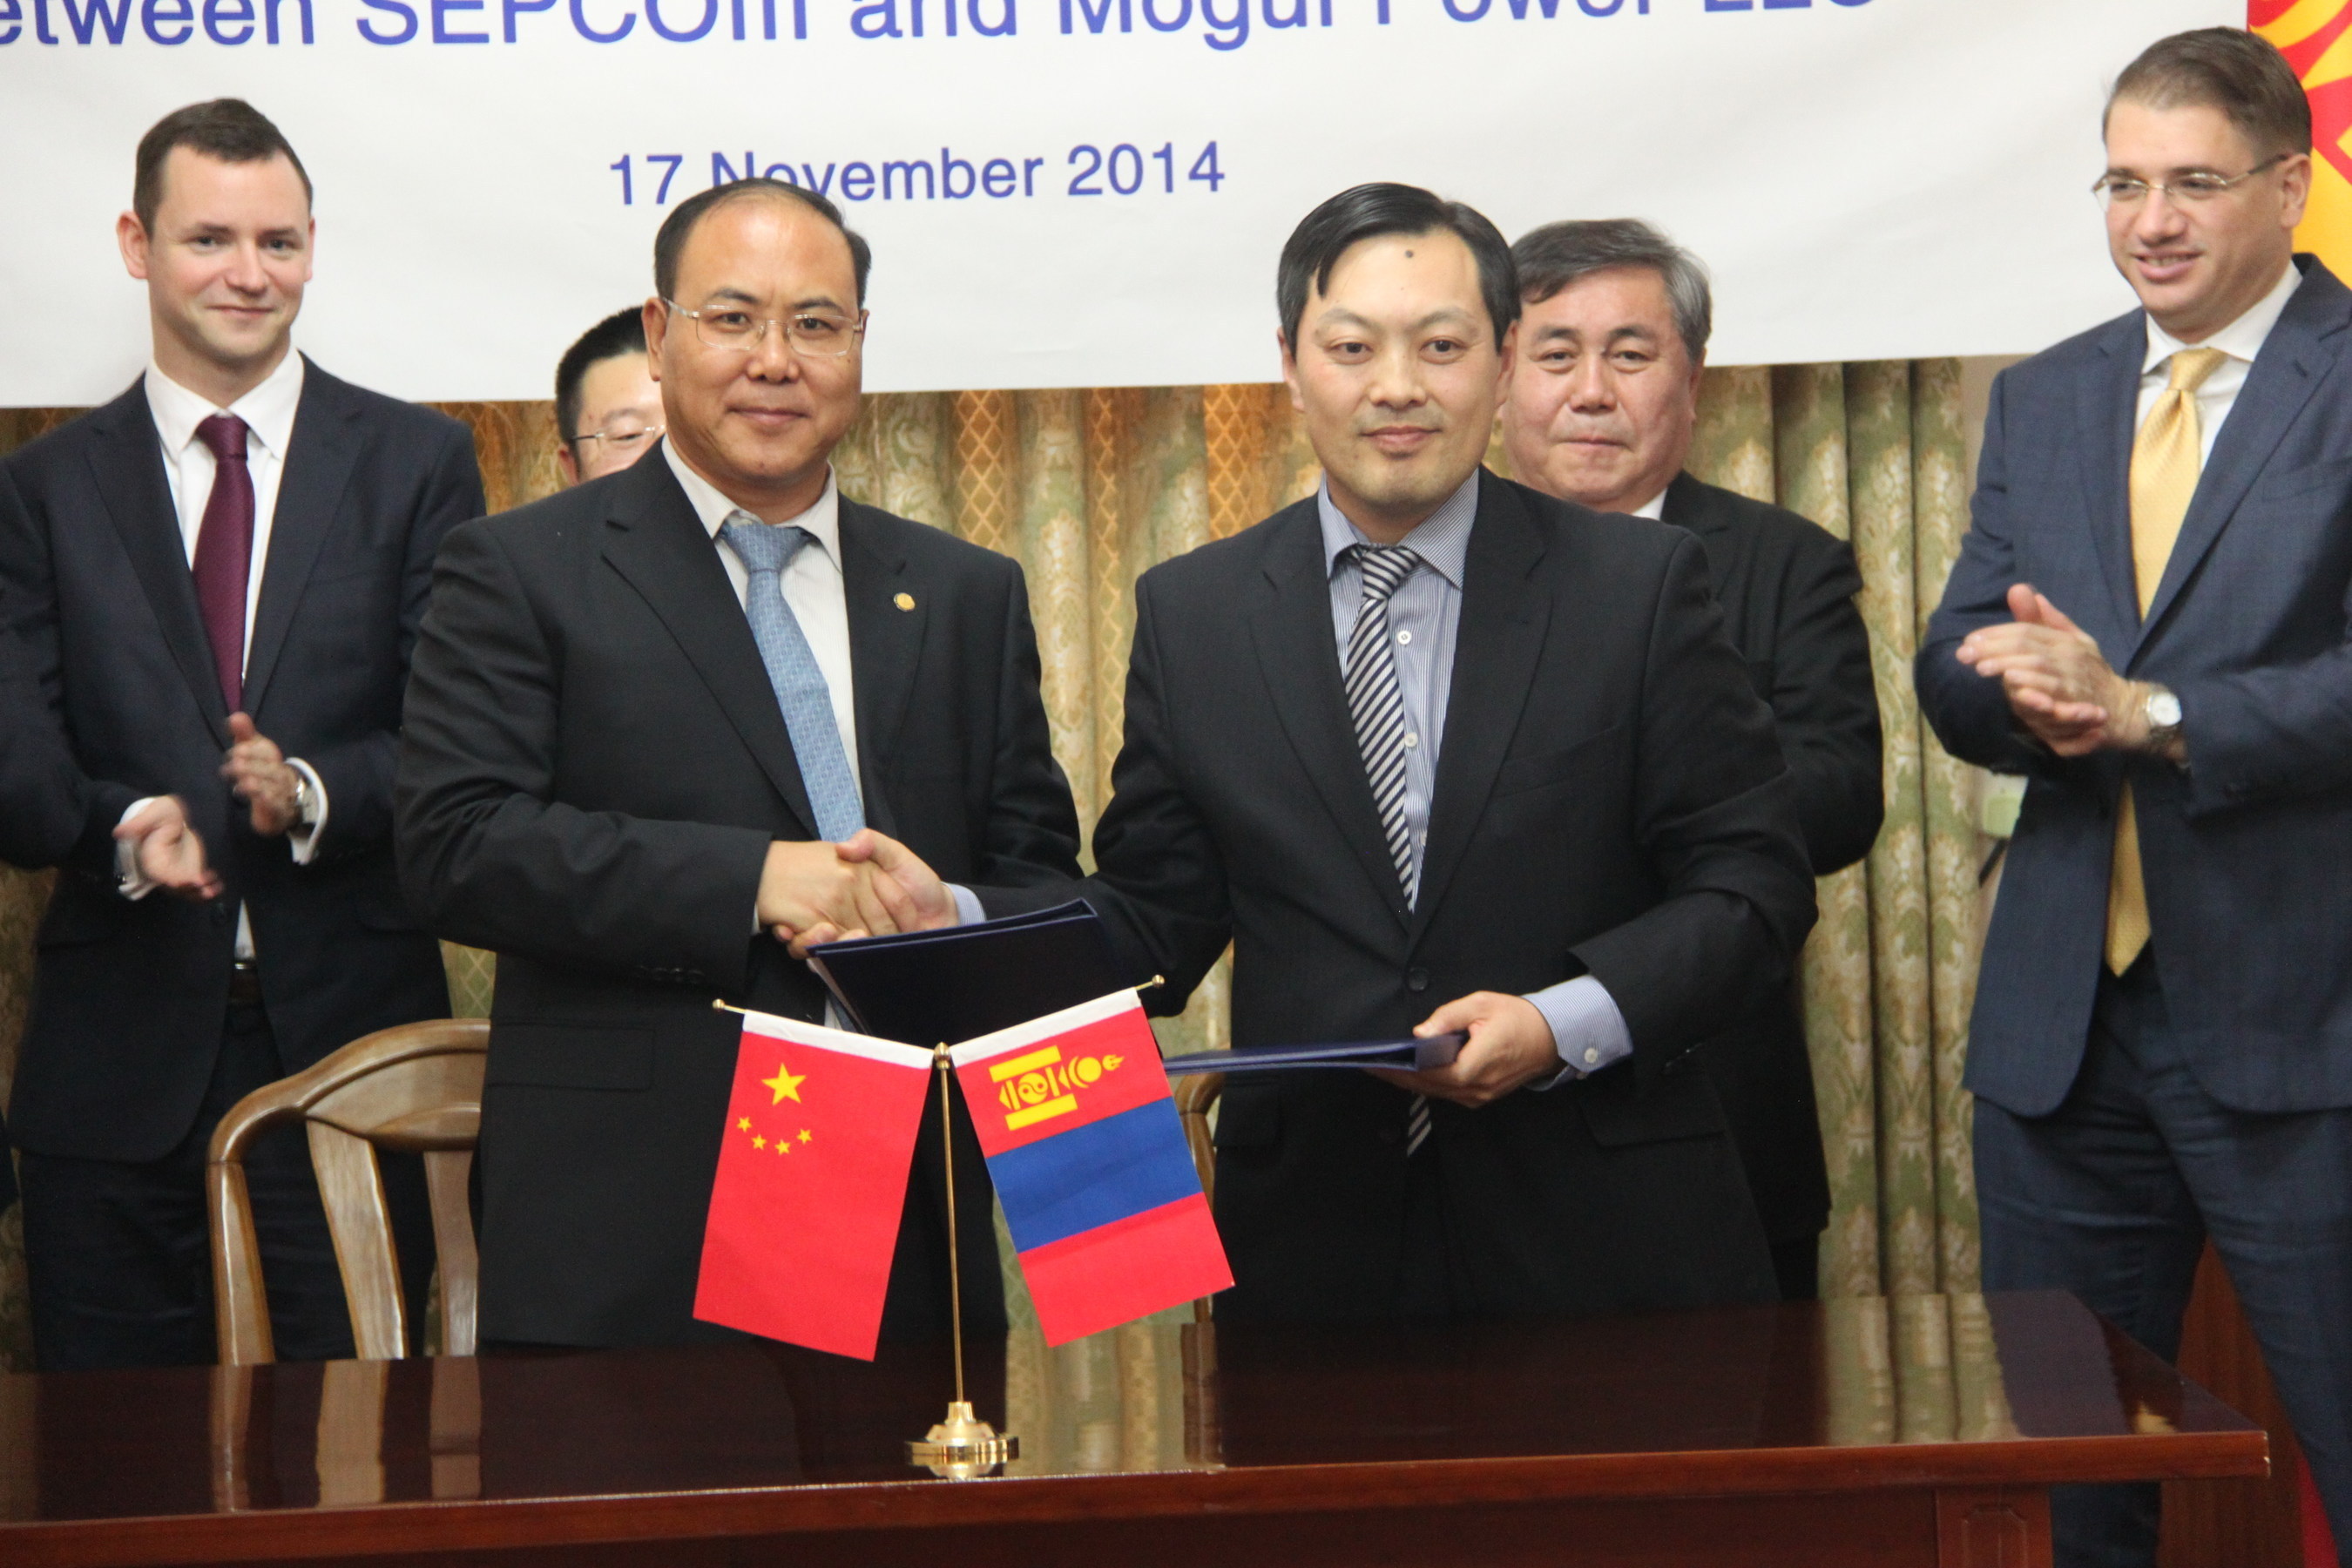 In the presence of Ambassador Sukhbaatar Ts., Mr. Zhang Hongsong, Vice President of SepcoIII (left) and Mr. Erdembileg J., CEO of Mogul Power LLC (right) celebrate the signing of the agreement.